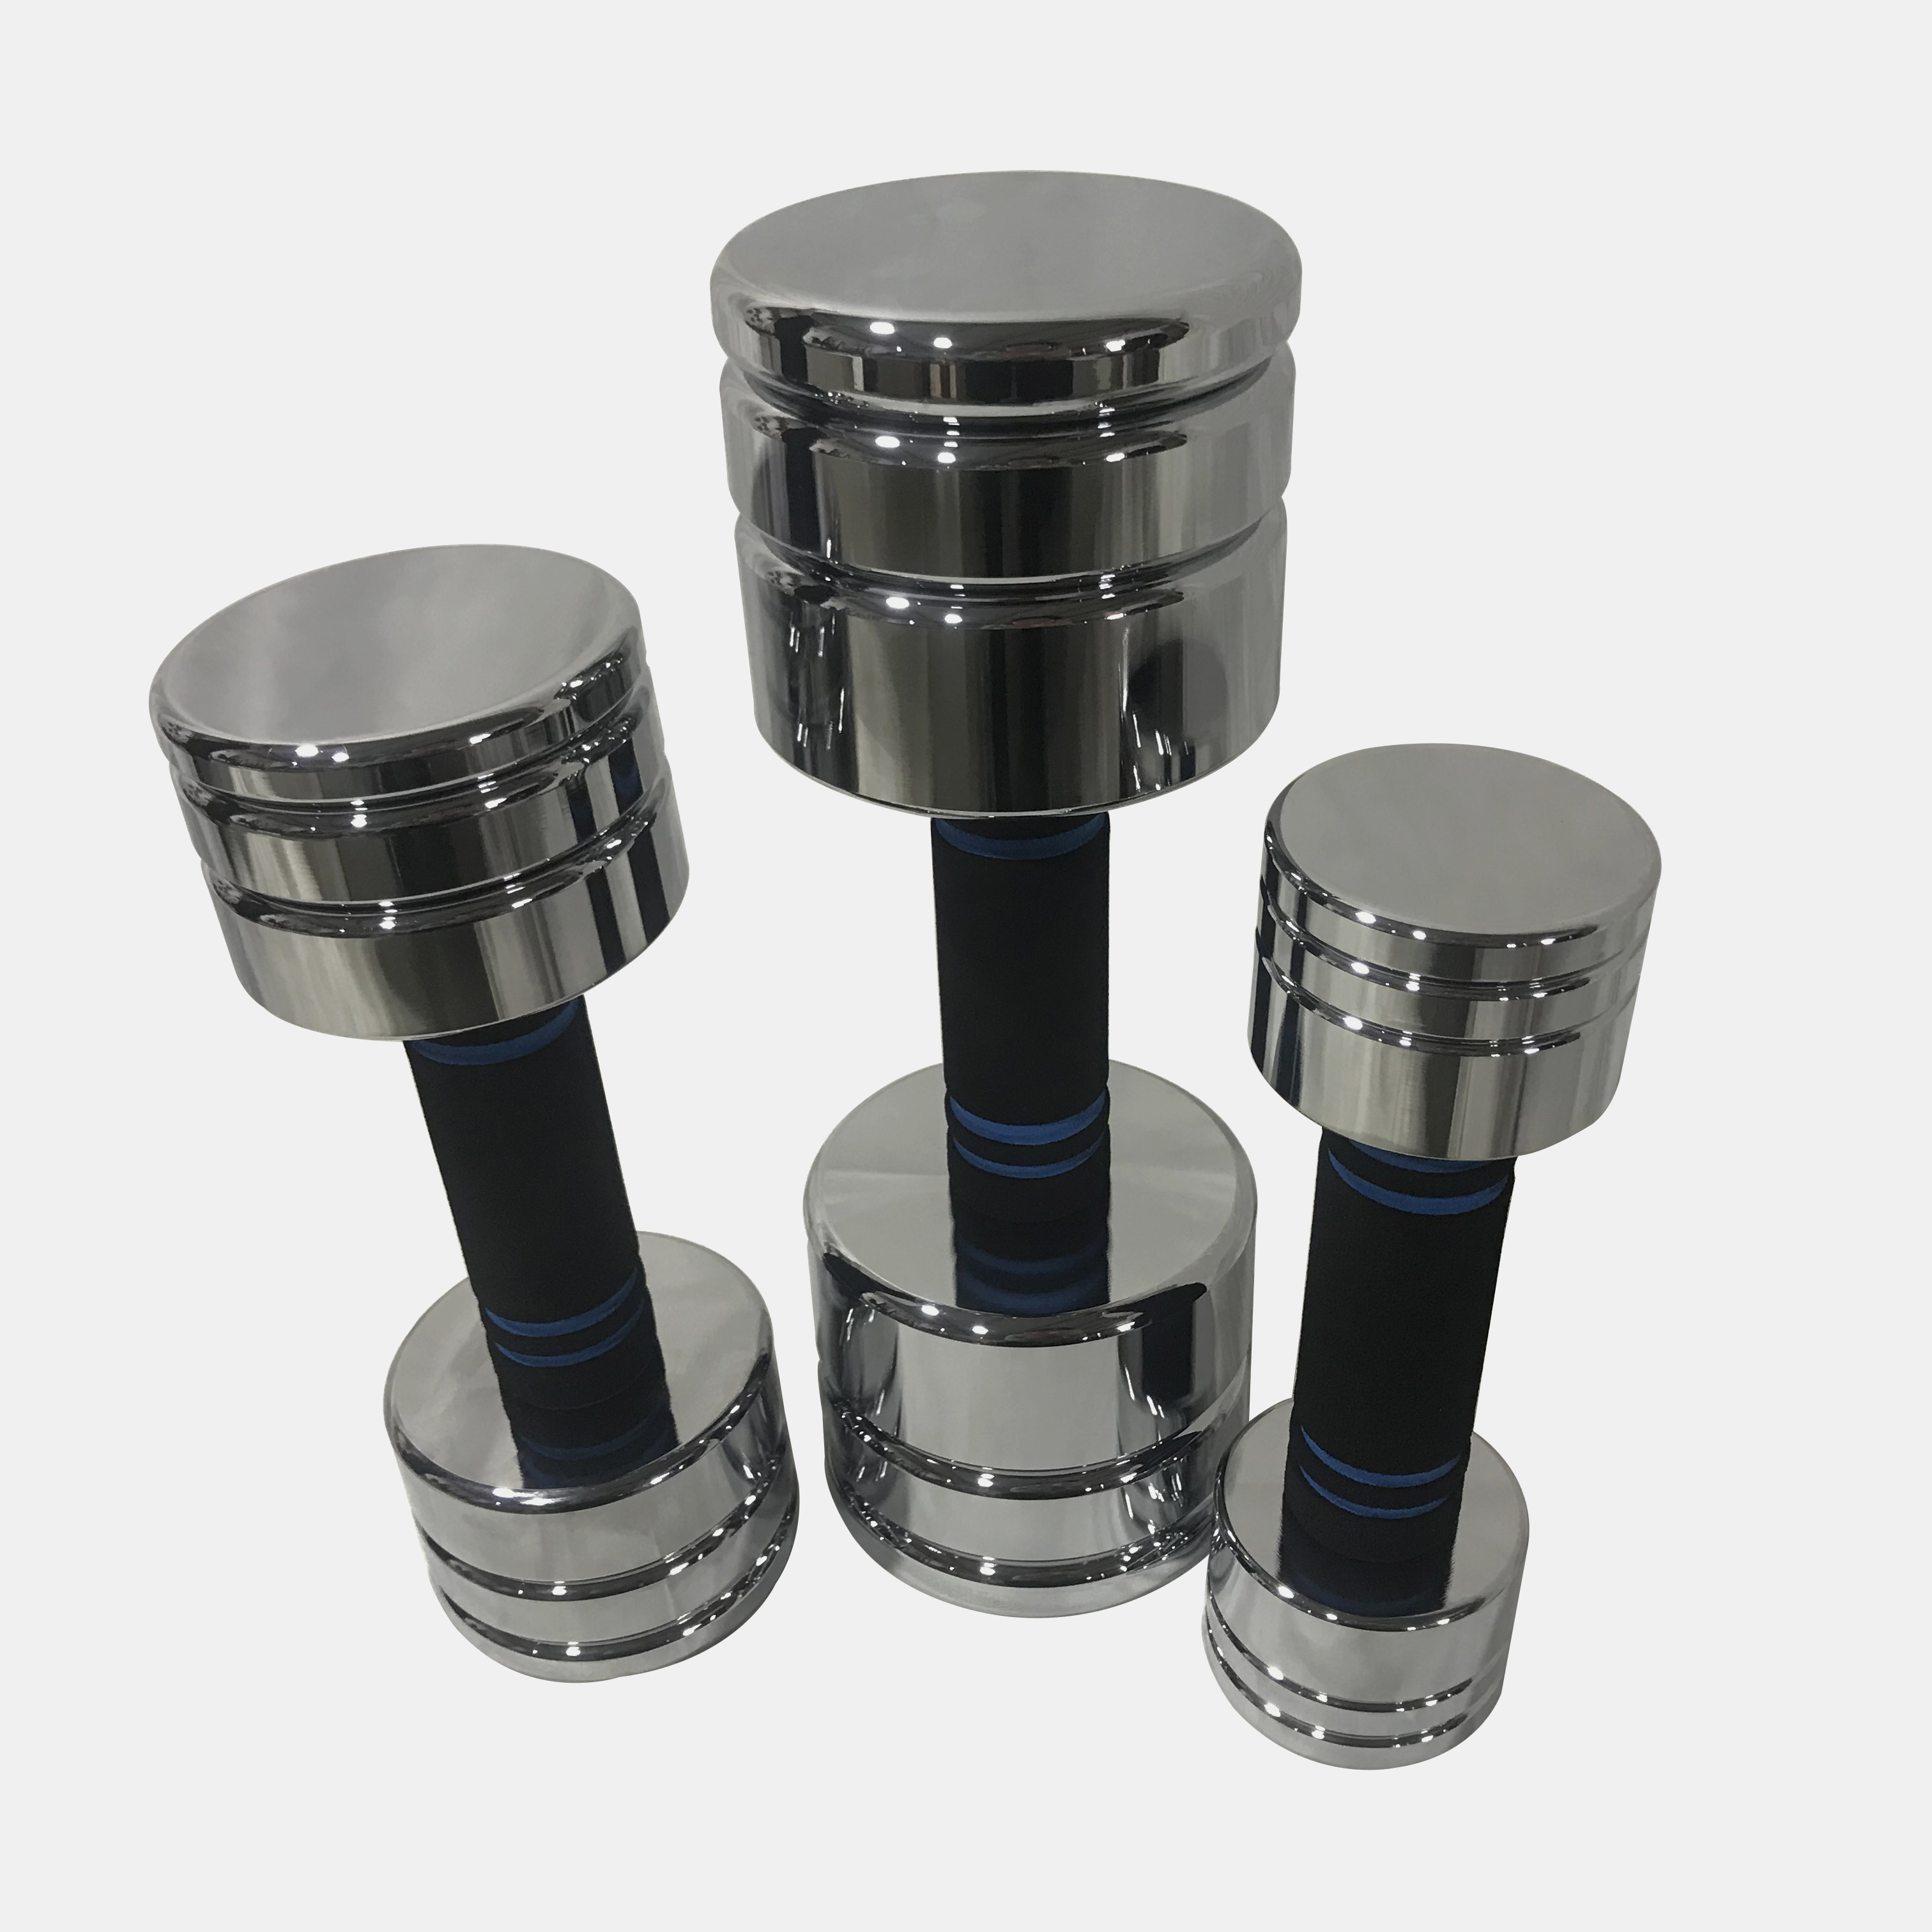 superior quality fitness equipment adjustable electroplating dumbbell for family exercise